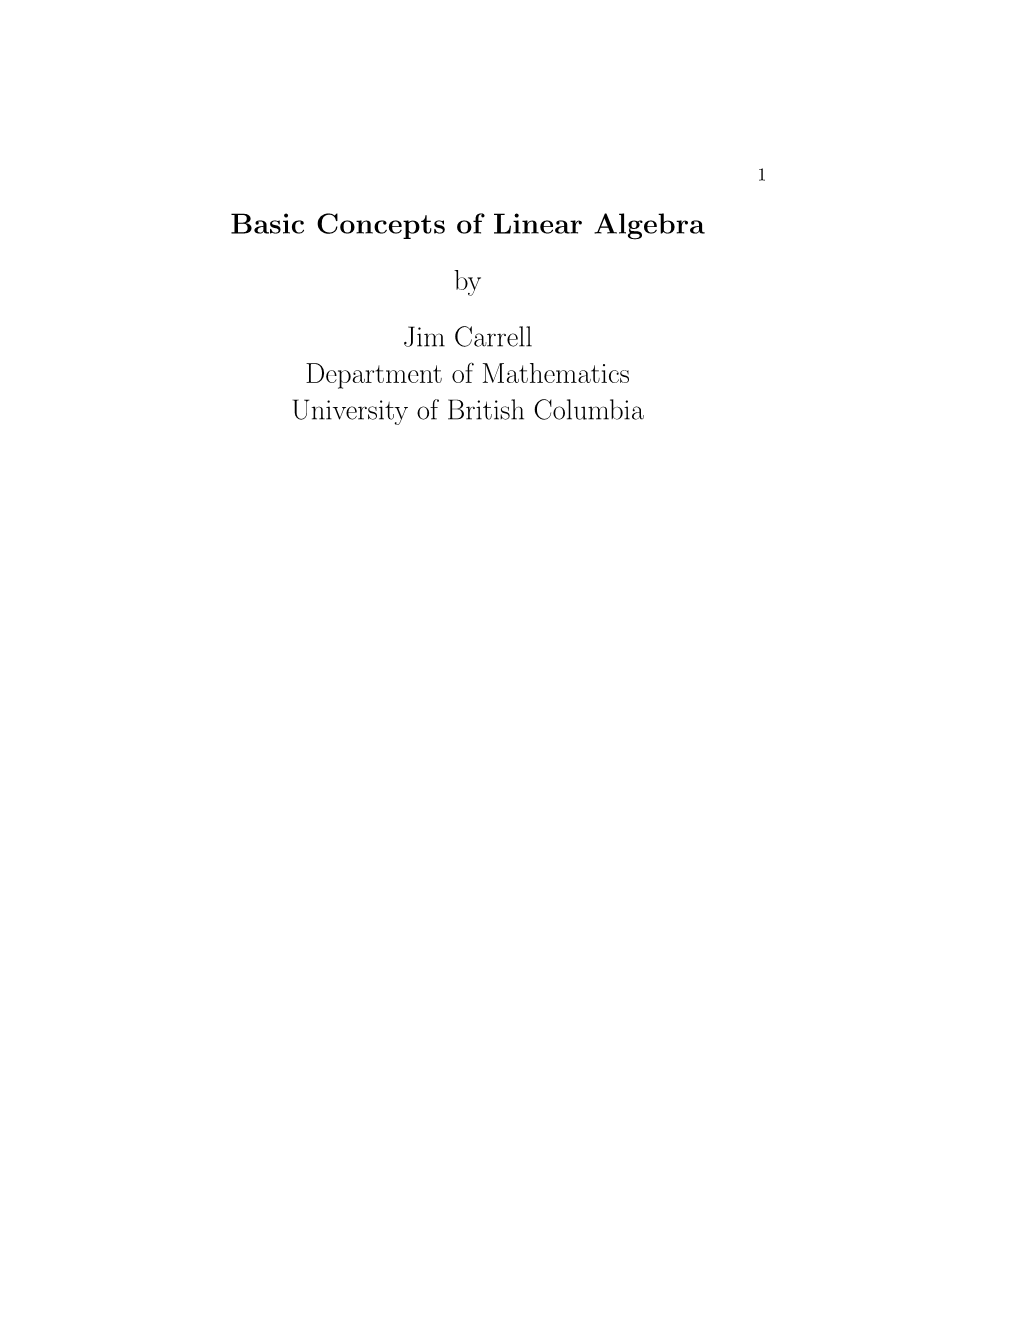 Basic Concepts of Linear Algebra by Jim Carrell Department of Mathematics University of British Columbia 2 Chapter 1